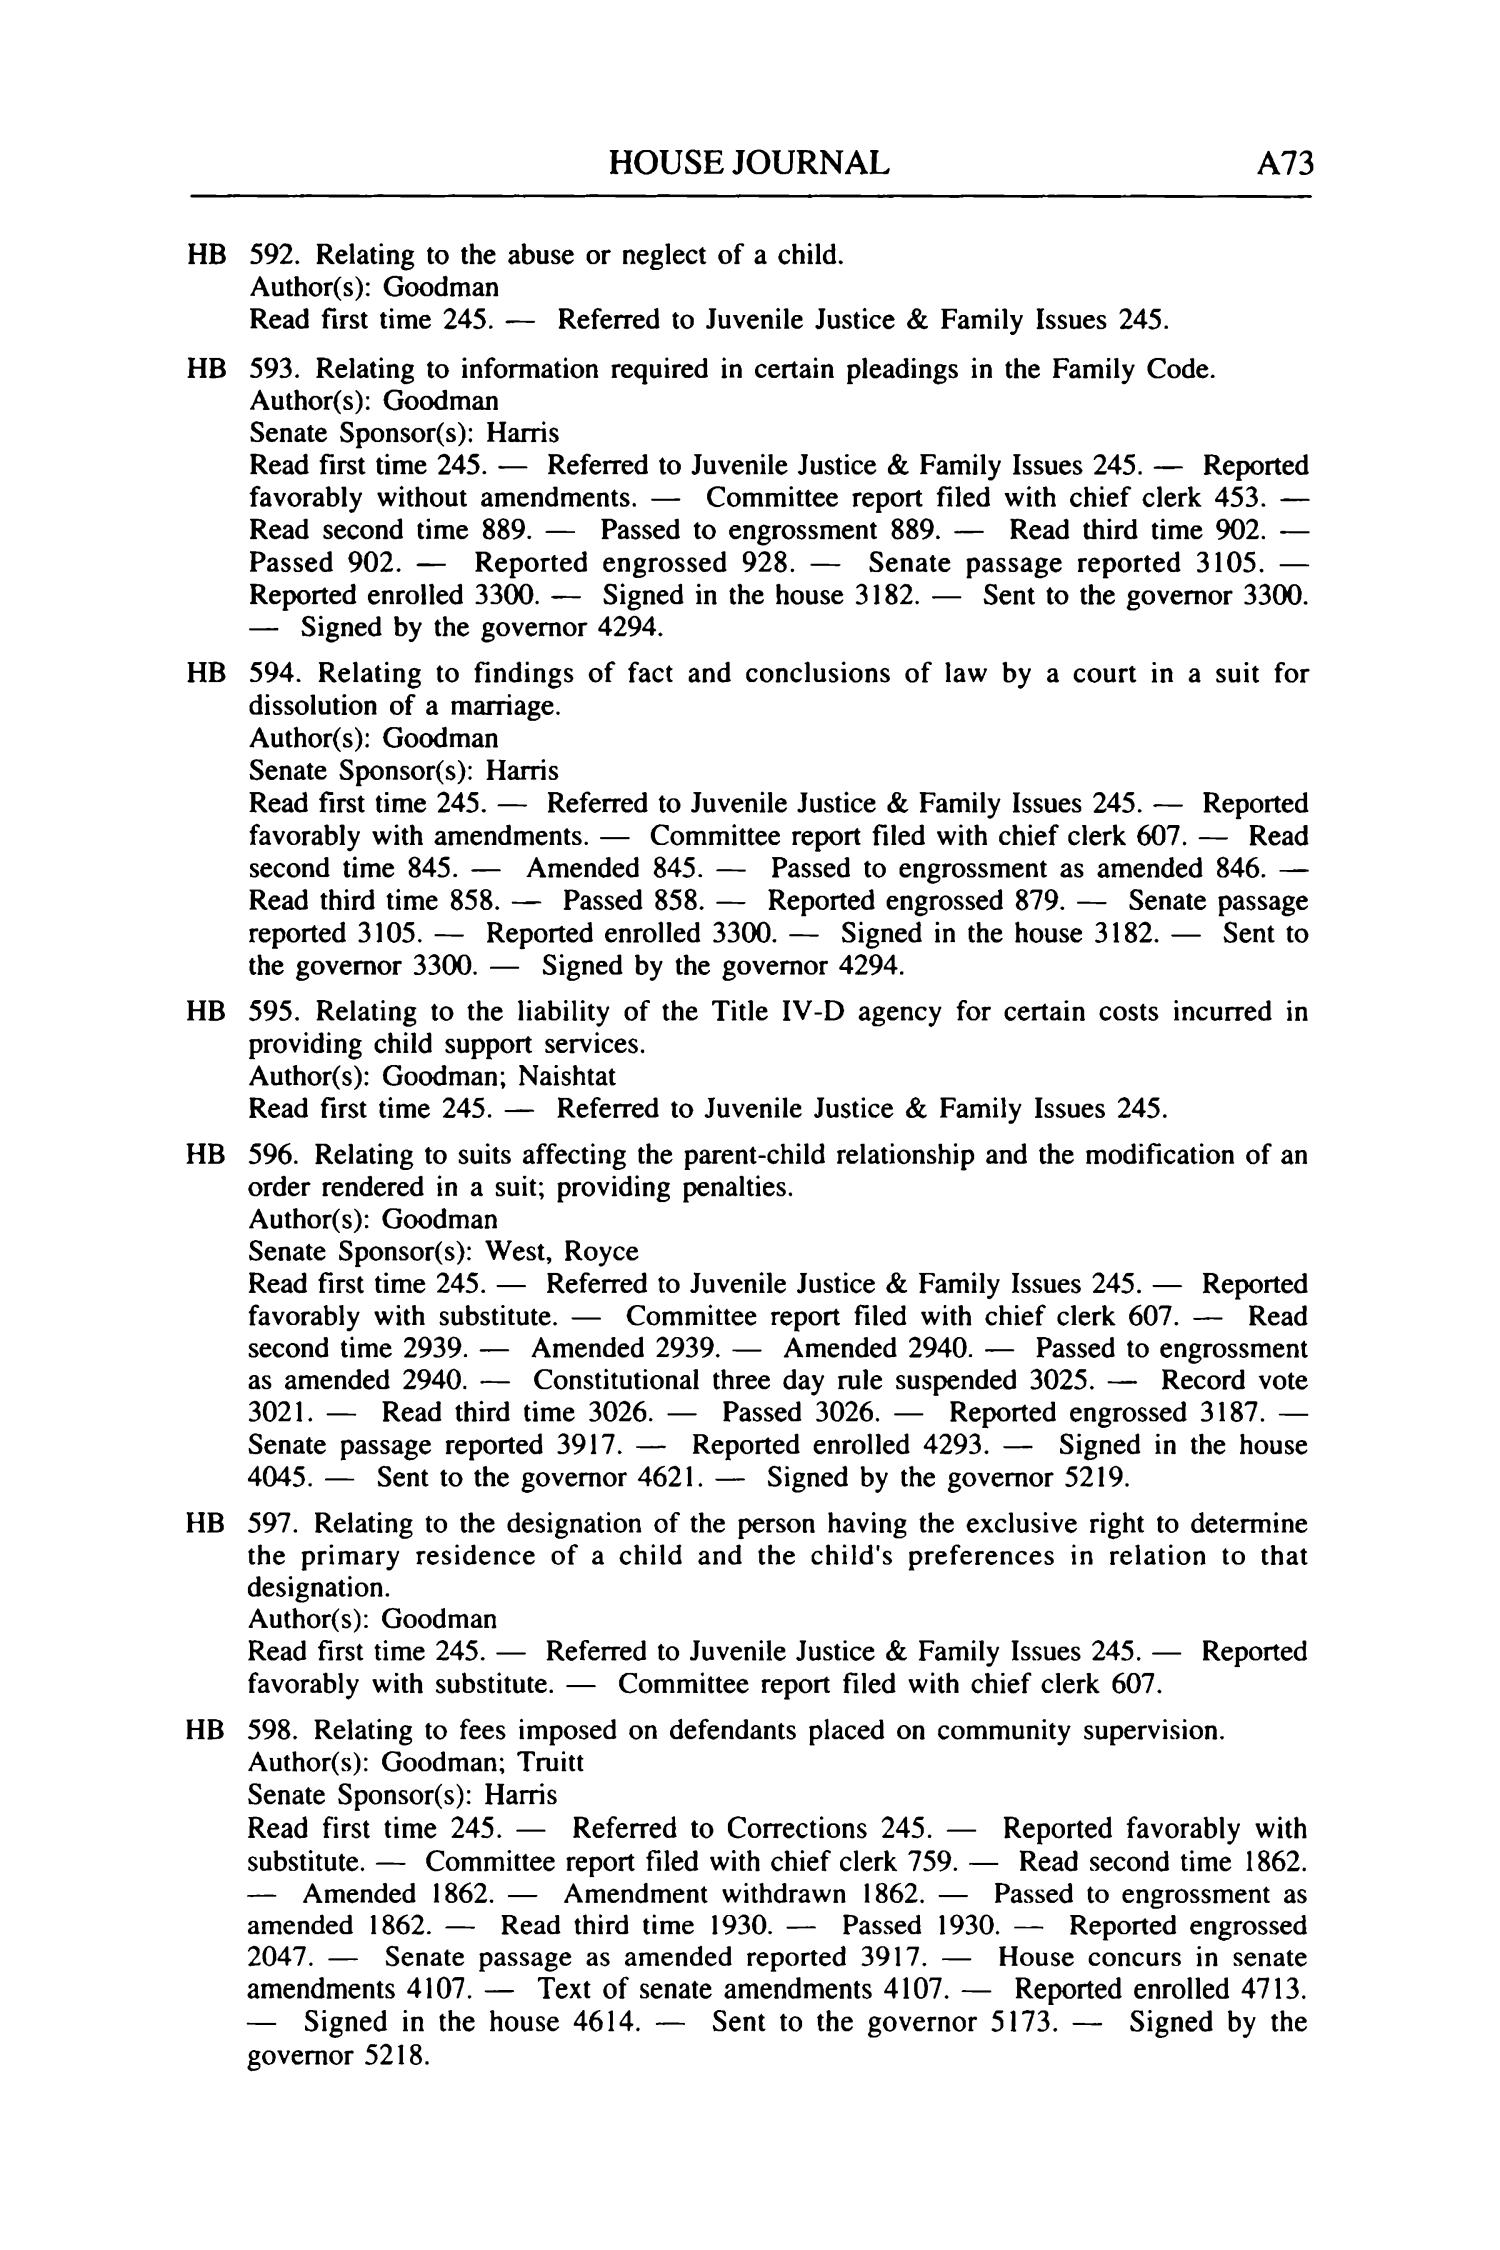 Journal of the House of Representatives of the Regular Session of the Seventy-Seventh Legislature of the State of Texas, Volume 6
                                                
                                                    A73
                                                